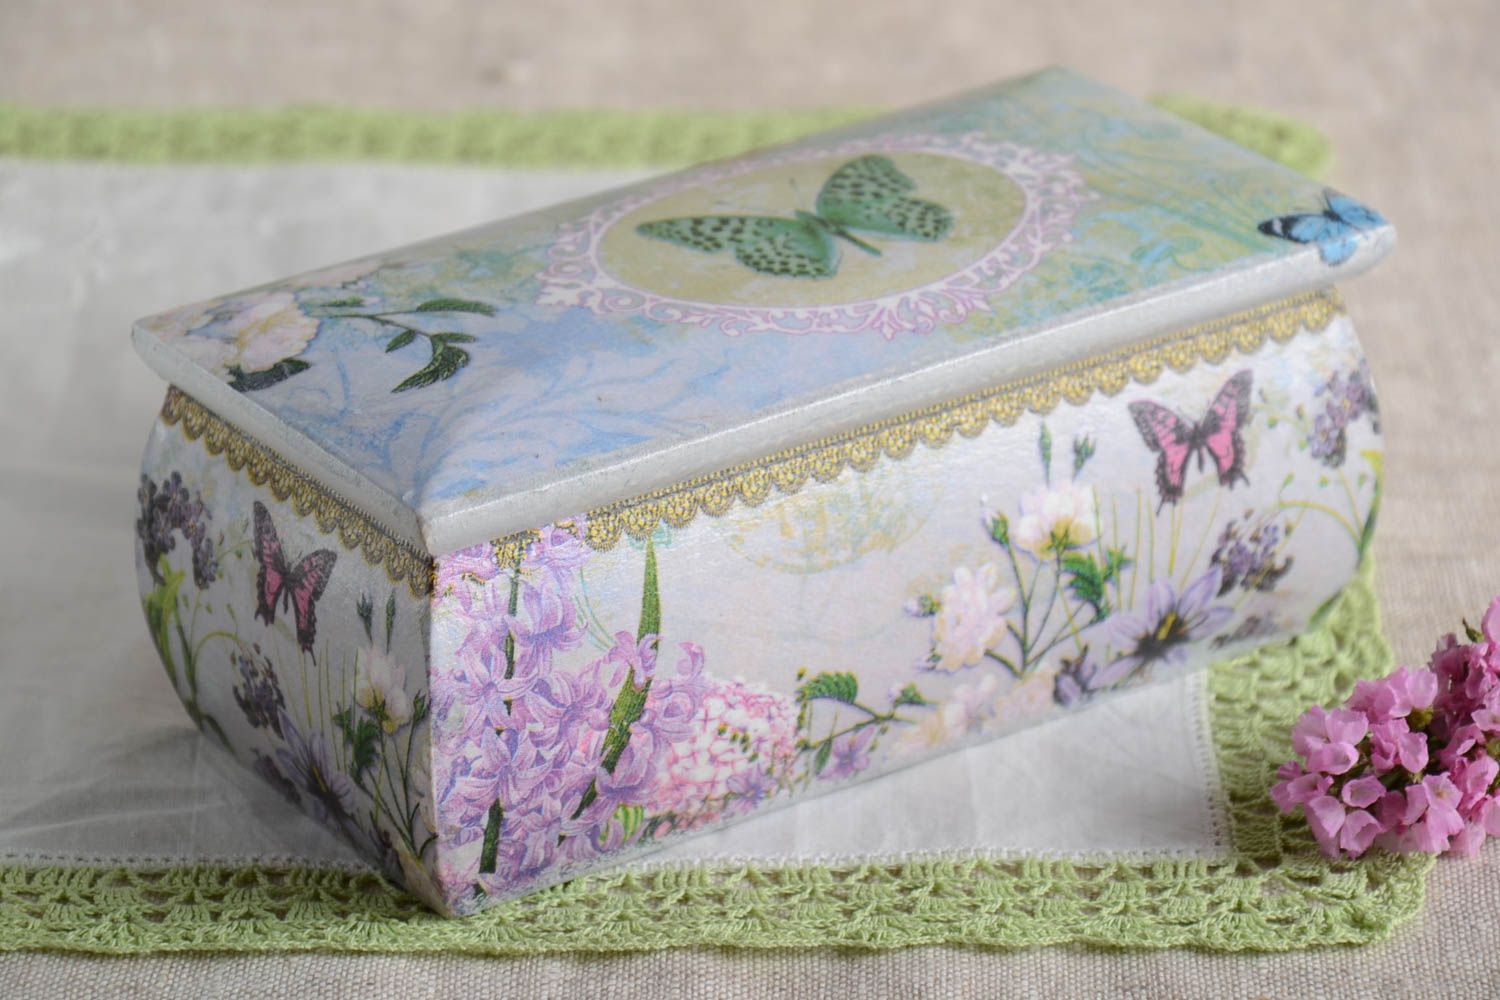 Beautiful handmade wooden jewelry box decoupage wooden box gifts for her photo 1